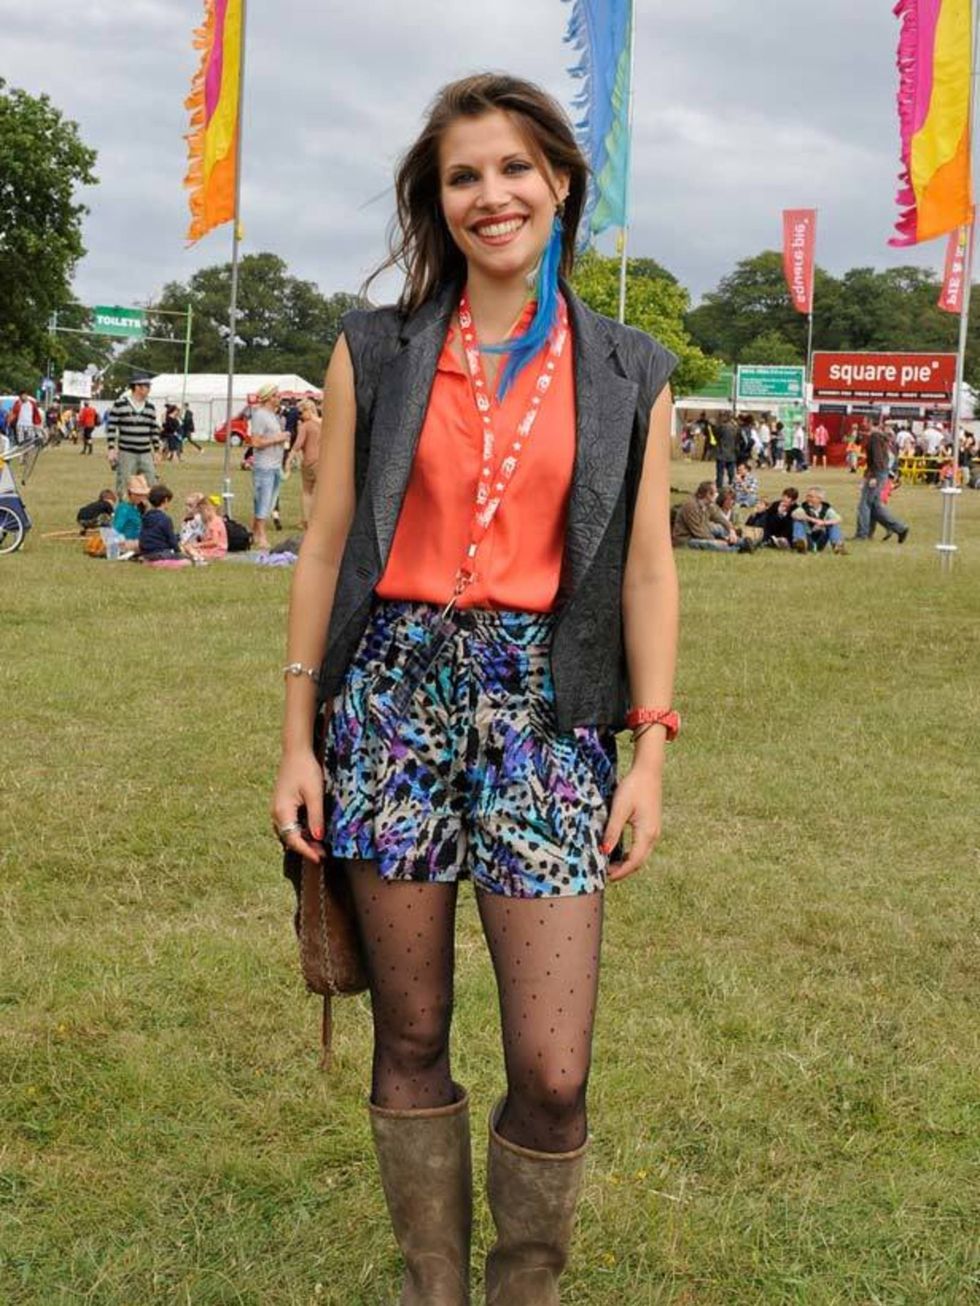 <p>Photo by Alistair Guy.Pips, 25, Presenter. Urban Outfitters shirt and earrings, vintage waistcoat and boots, Compiot shorts, Toy watch.</p>